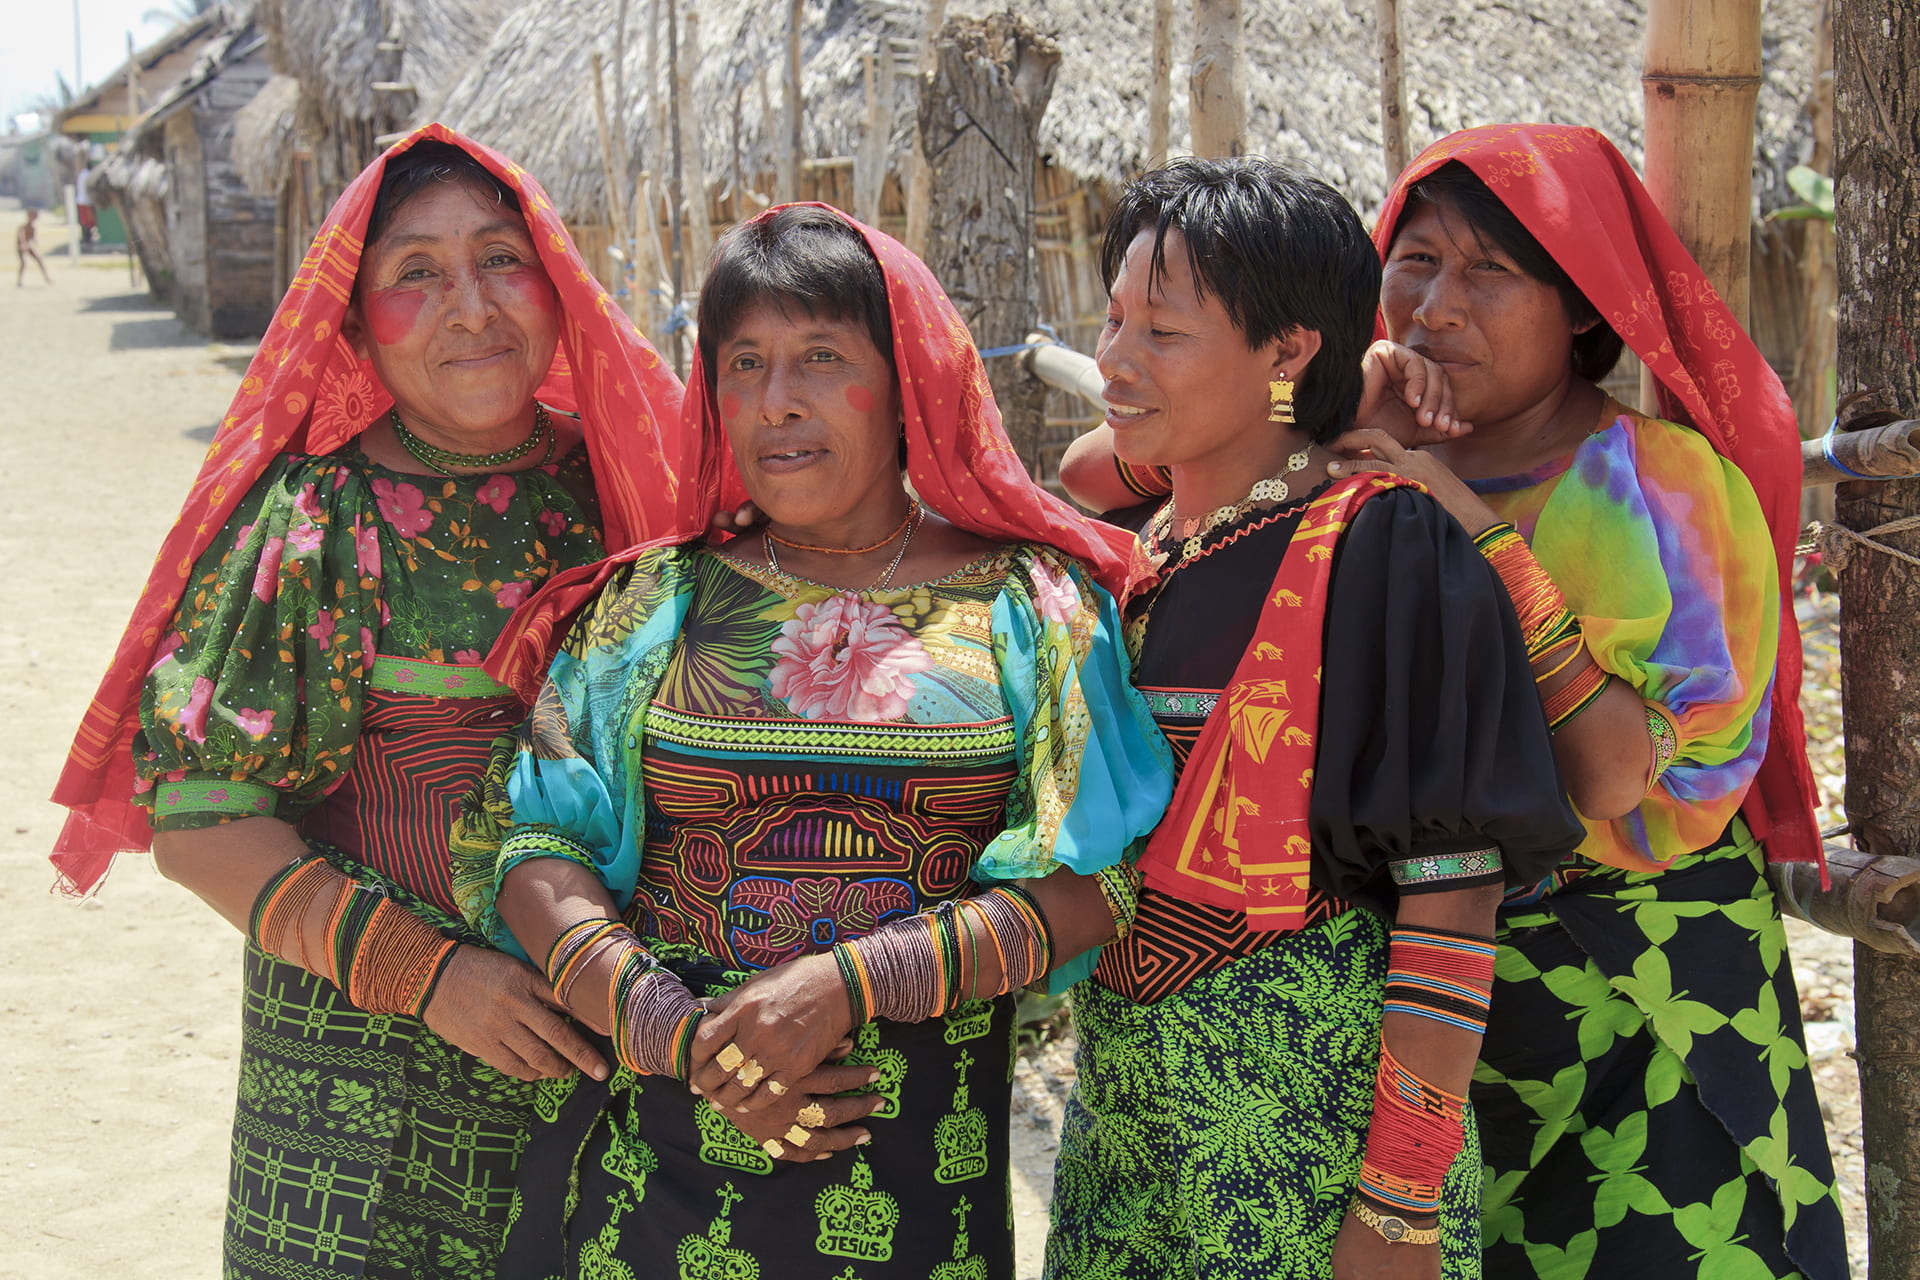 Photograph of four women wearing red headscarves, wrapped skirts, colorful blouses and many beaded bracelets.